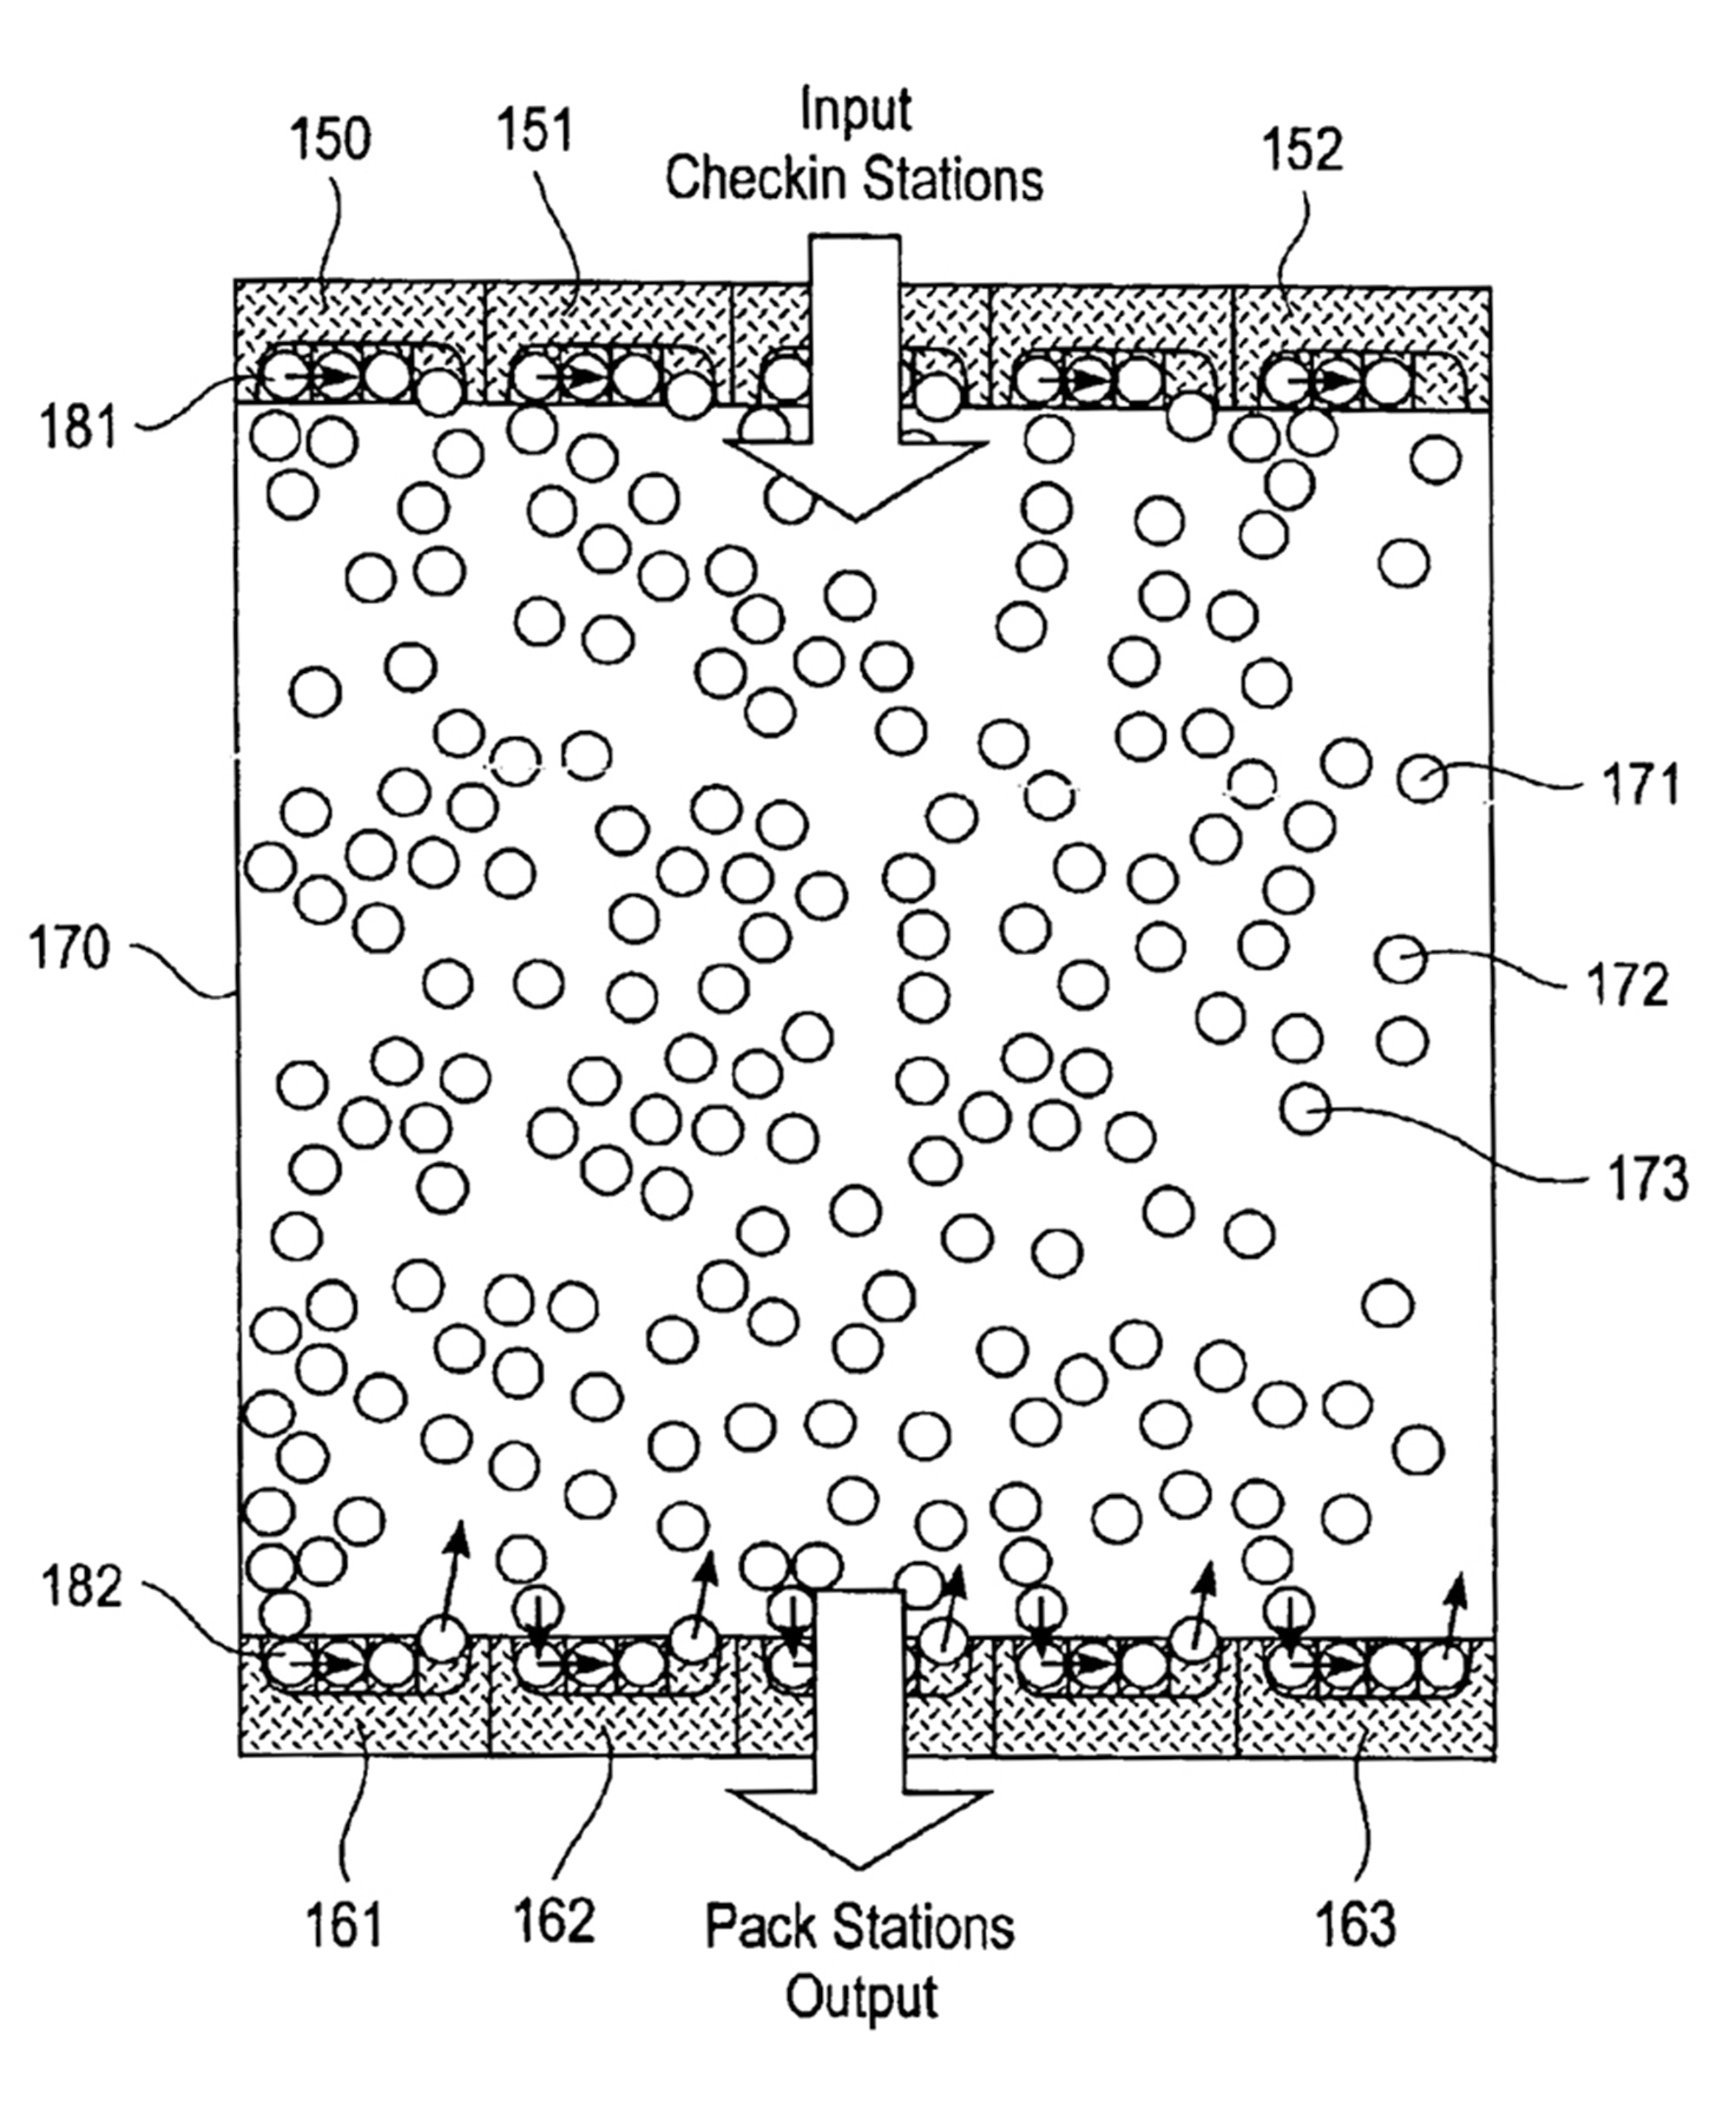 The paths of Kiva’s mobile drive units are determined by coordinating software. Because the location of the inventory units is always changing, the drive units do not follow fixed paths. Illustration for US patent no. 6950722 B2 (27 September 2005).